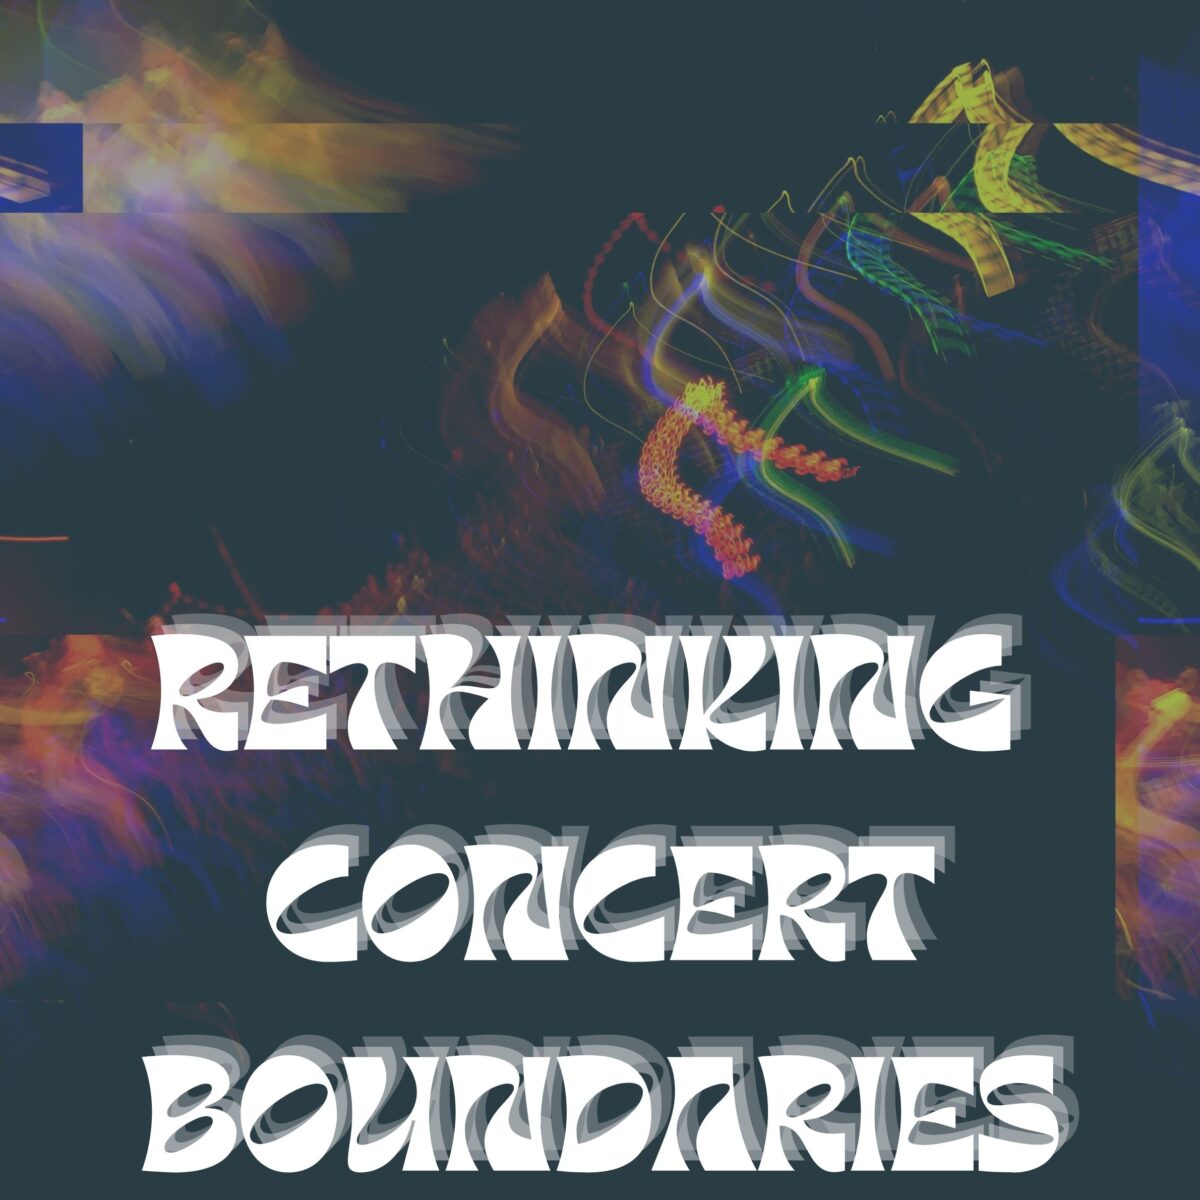 Glitchy photo. White text that reads "rethinking concert boundaries.